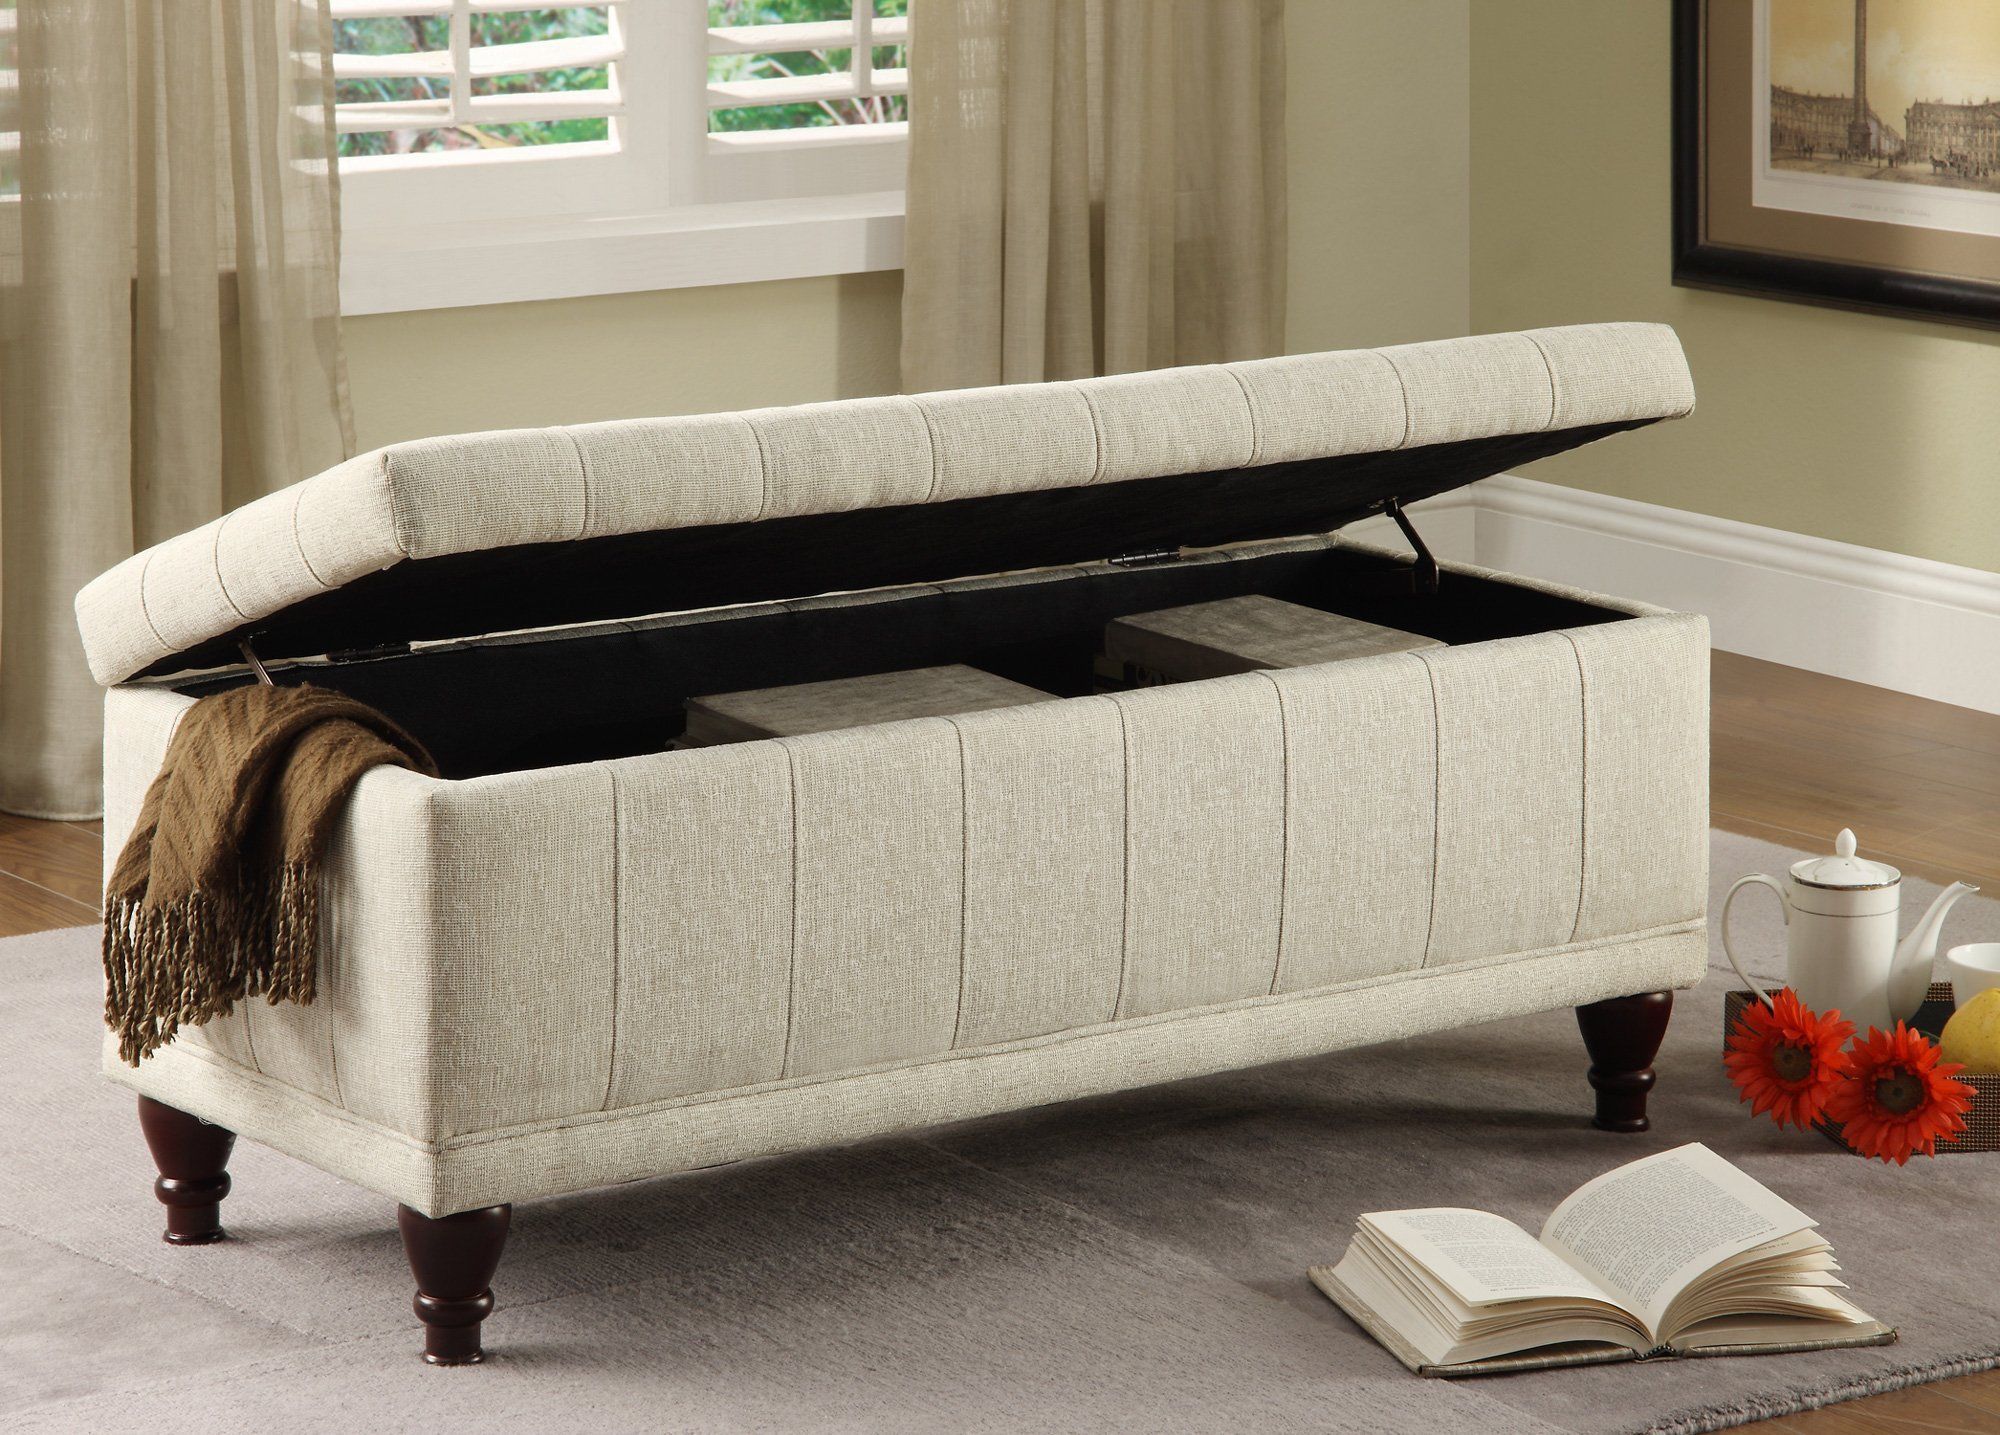 Homelegance Lift Top Storage Bench With Tufted Accents, Beige Fabric Throughout Linen Tufted Lift Top Storage Trunk (View 12 of 20)